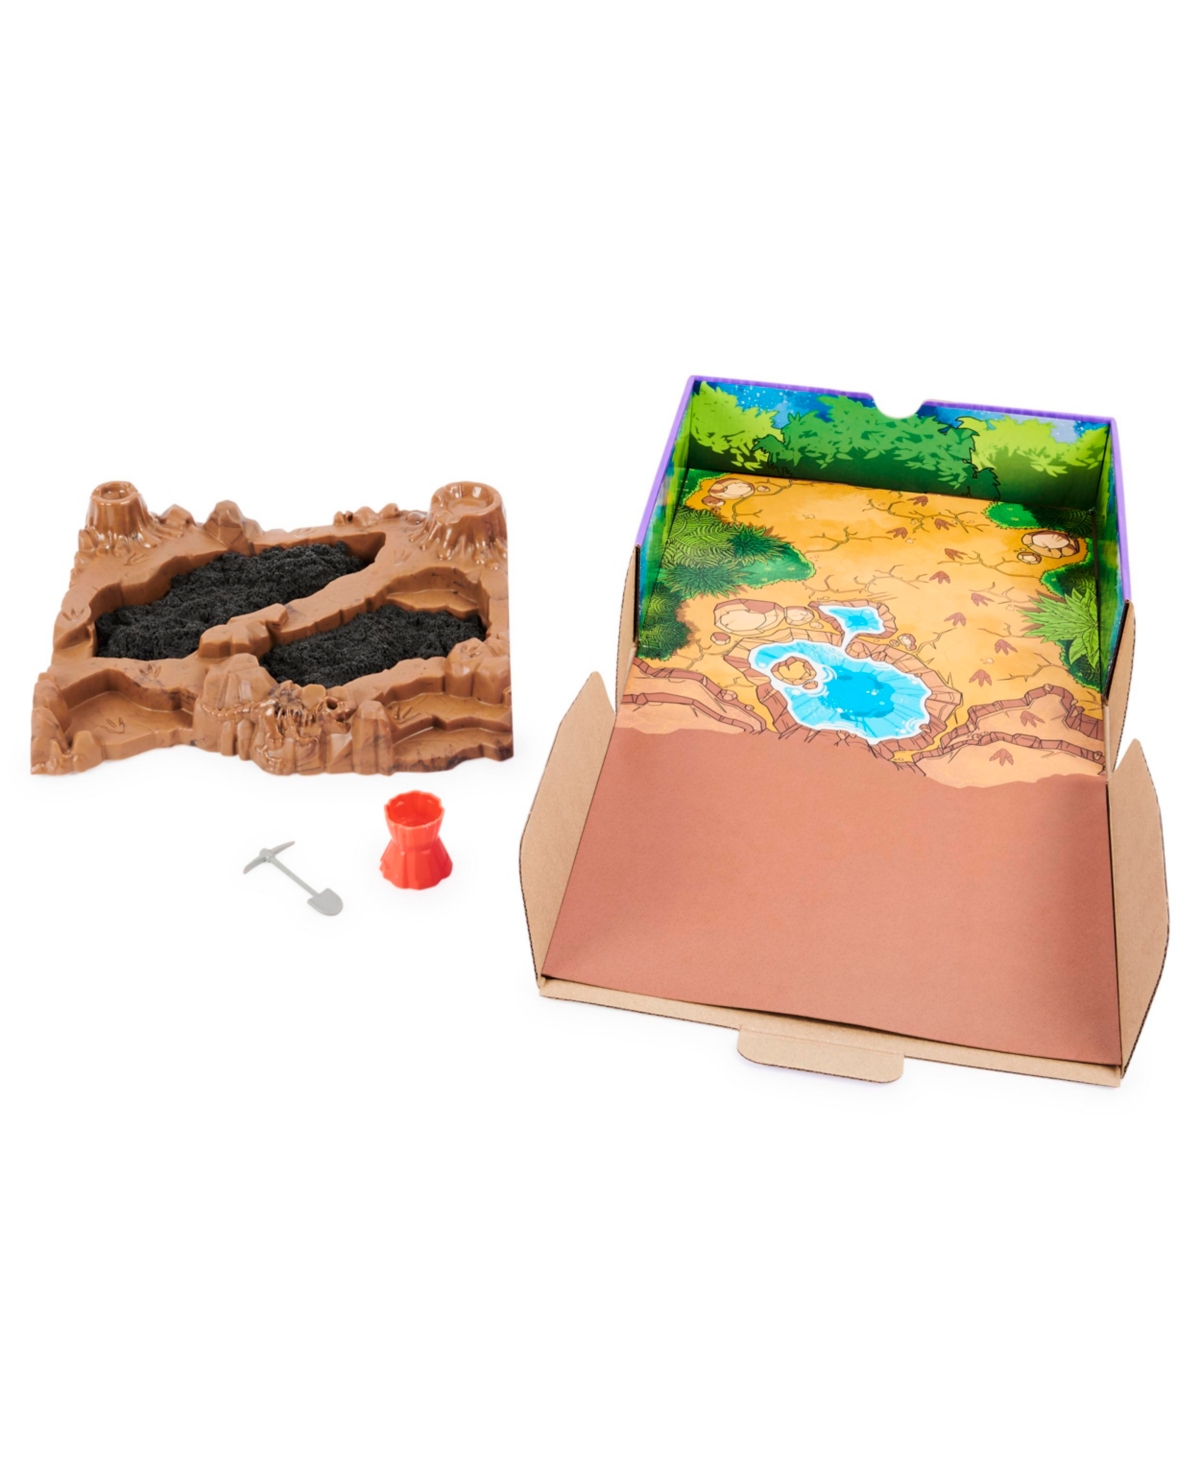 Kinetic Sand, Dino Dig Playset with 10 Hidden Dinosaur Bones to Discover - Multi-color